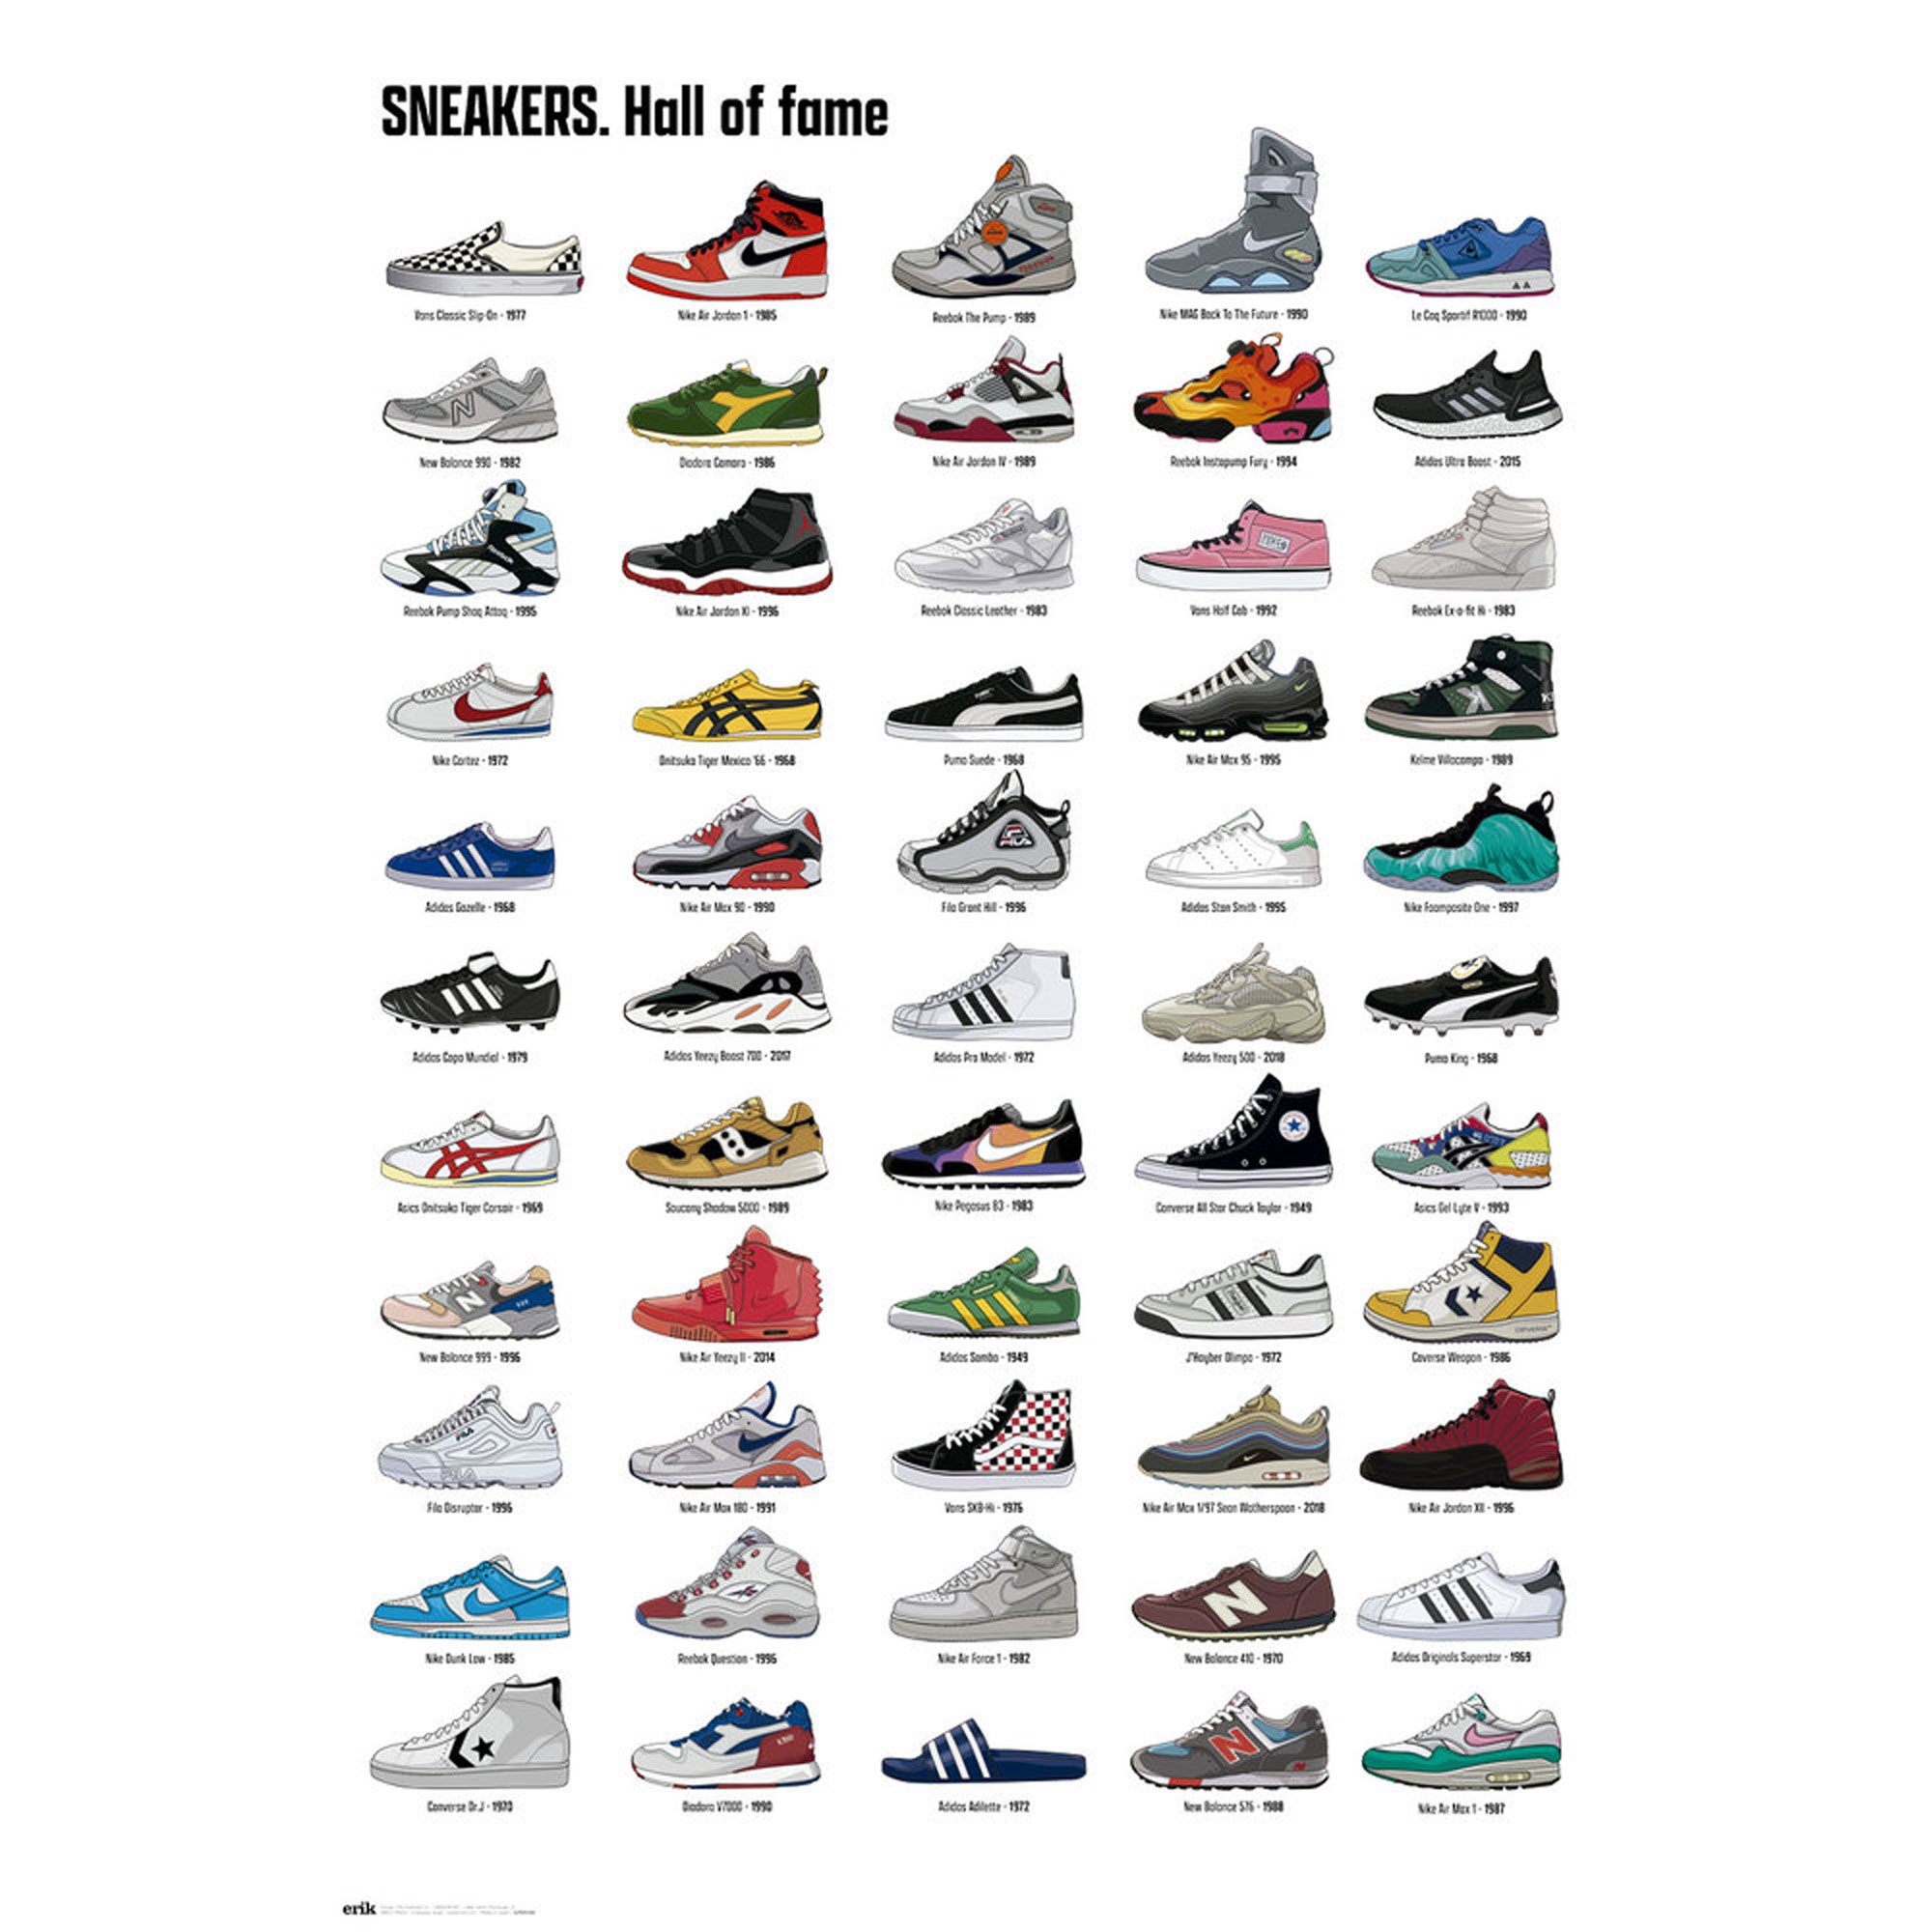 Hall Sneakers - of Fame